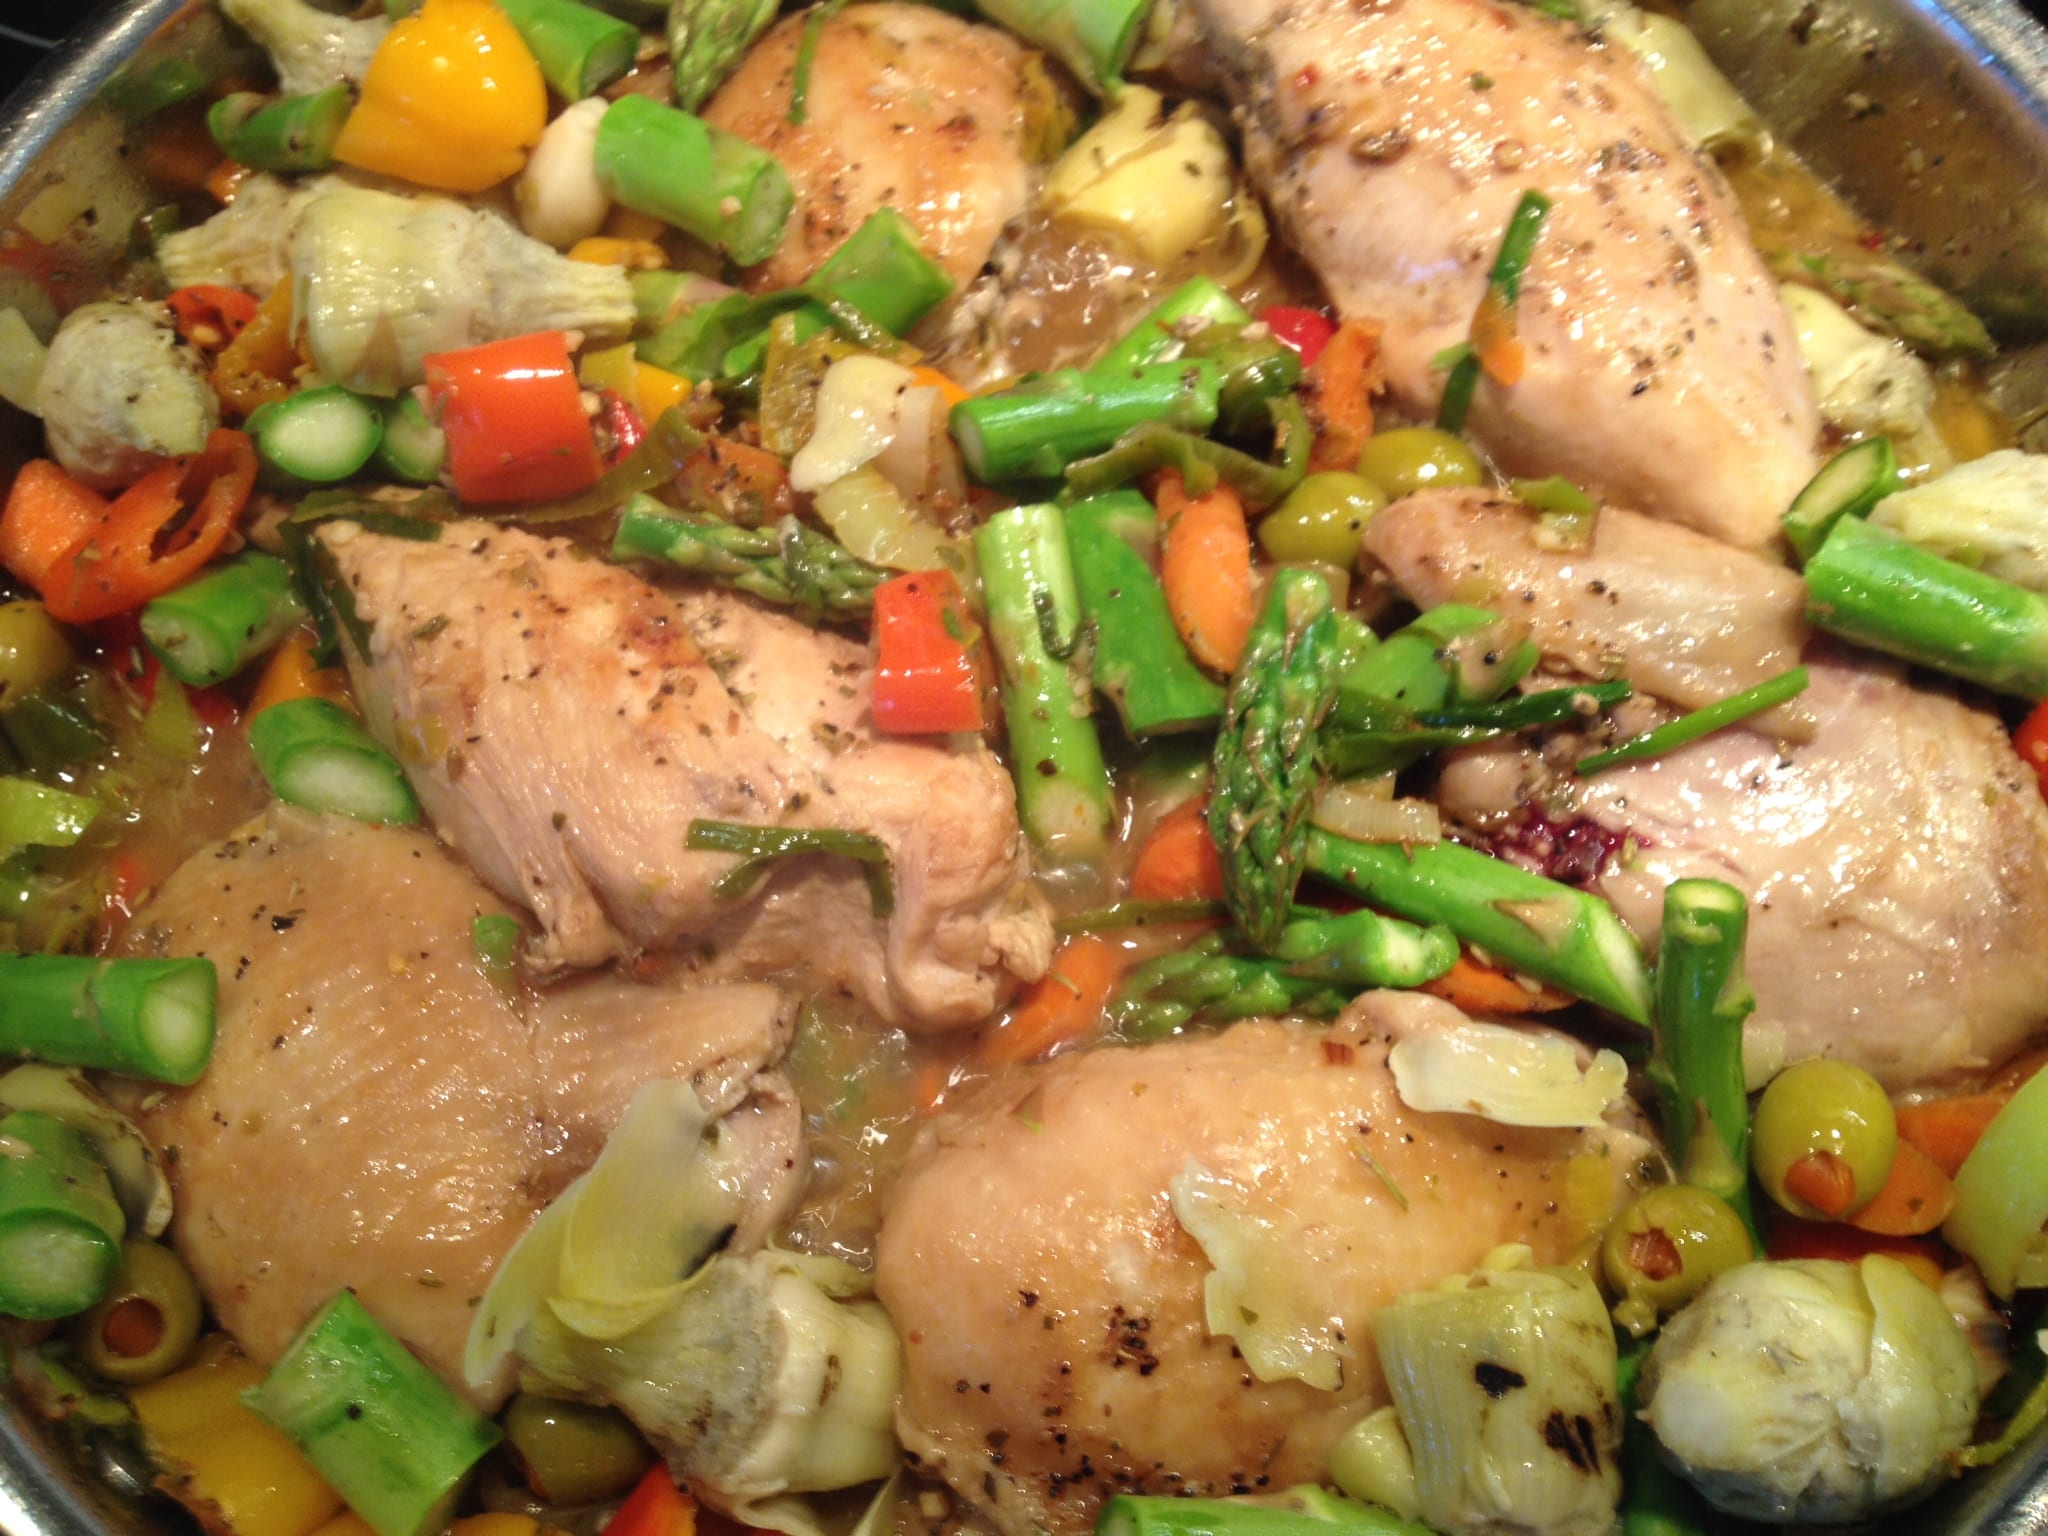 Tuscan Chicken with Asparagus and Artichokes